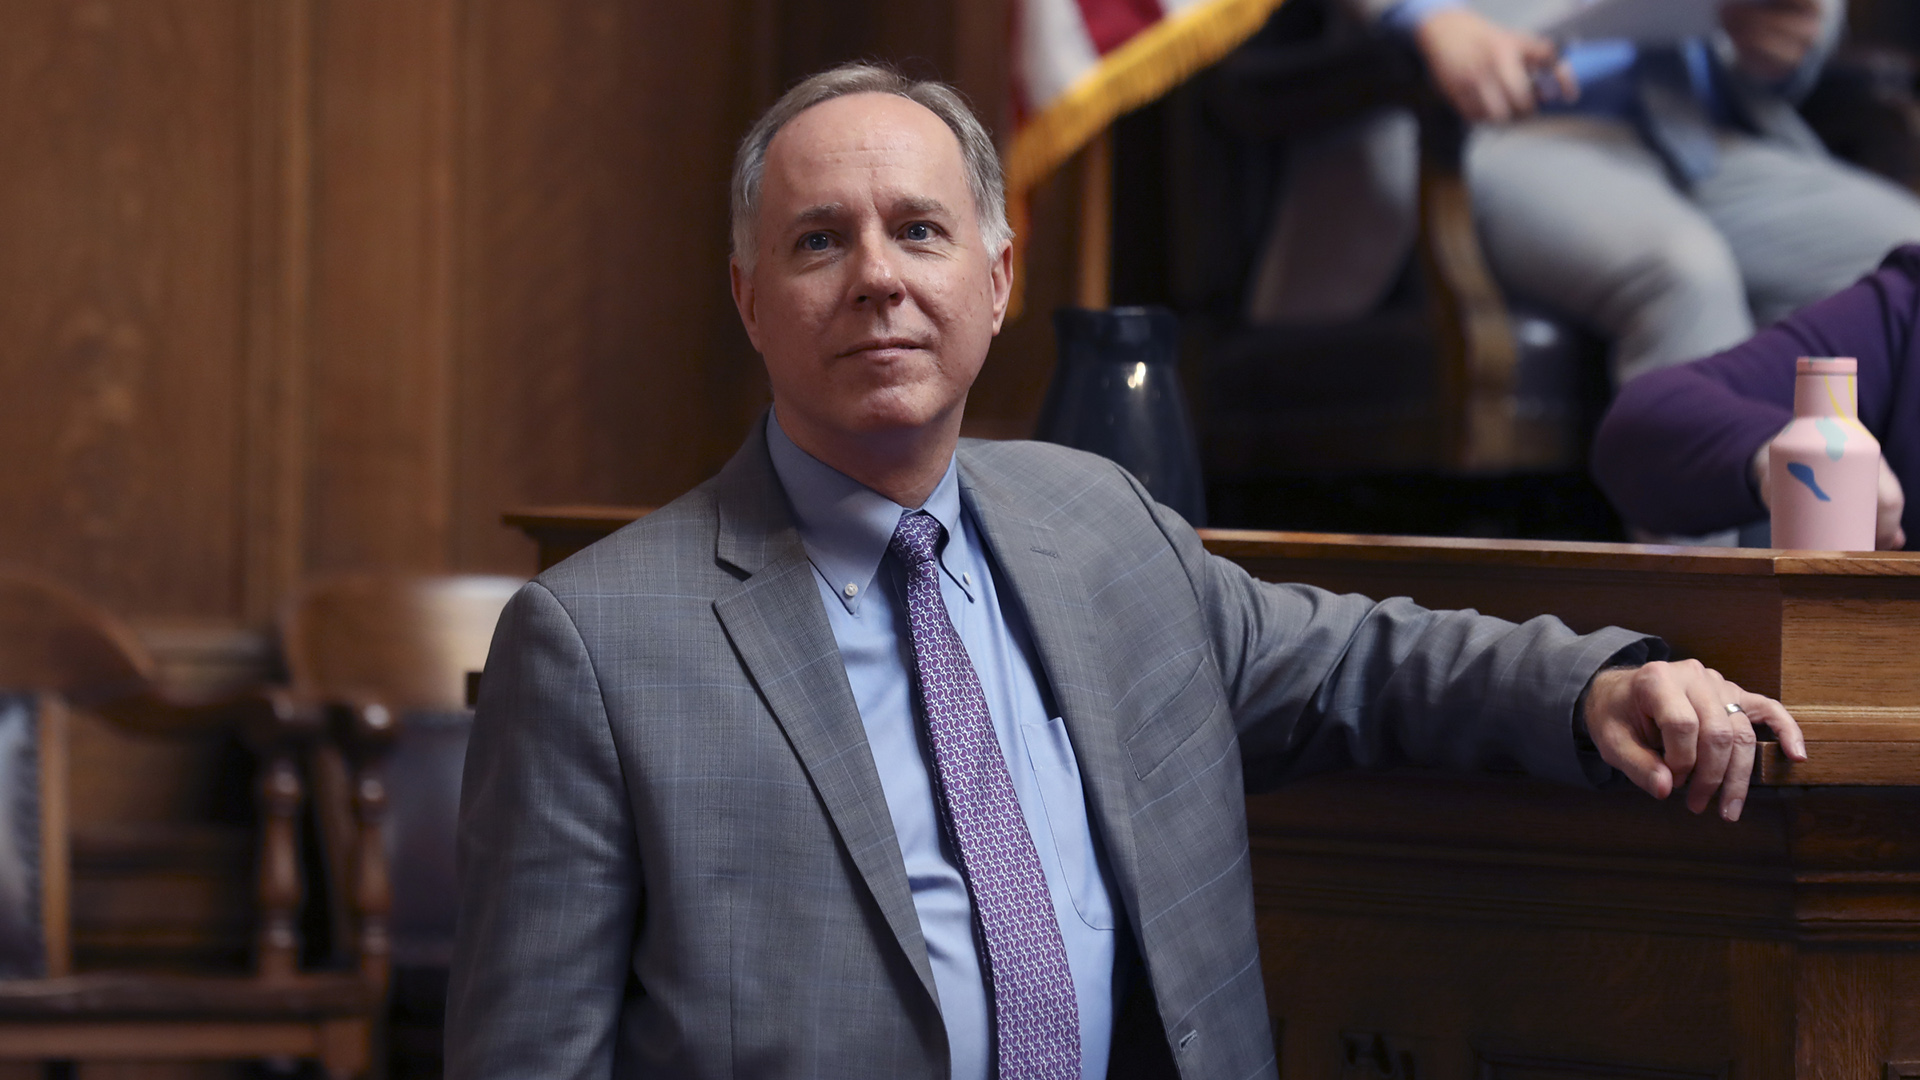 Robin Vos stands in a room with wood-paneled walls with his arm resting on the edge of a dais.